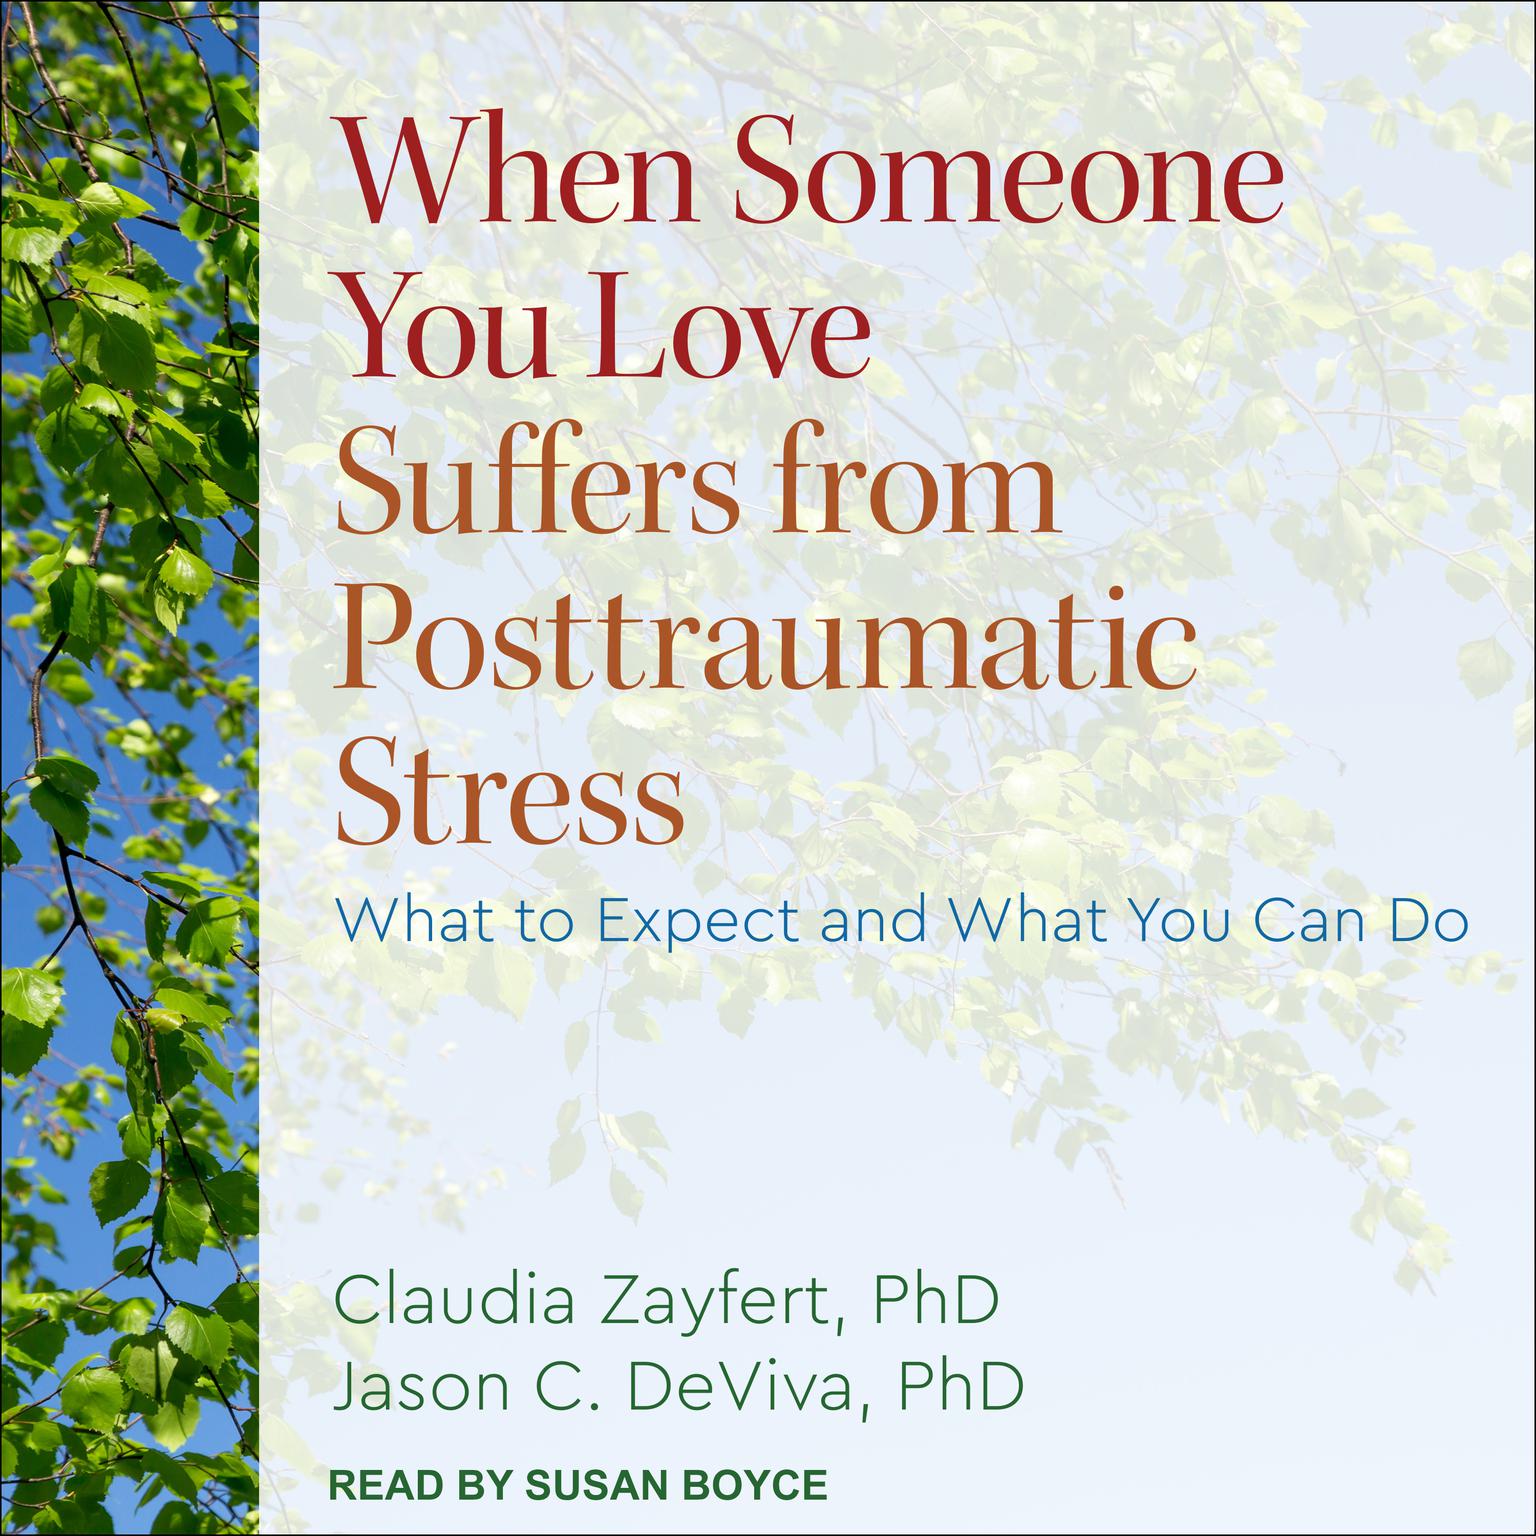 When Someone You Love Suffers from Posttraumatic Stress: What to Expect and What You Can Do Audiobook, by Claudia Zayfert